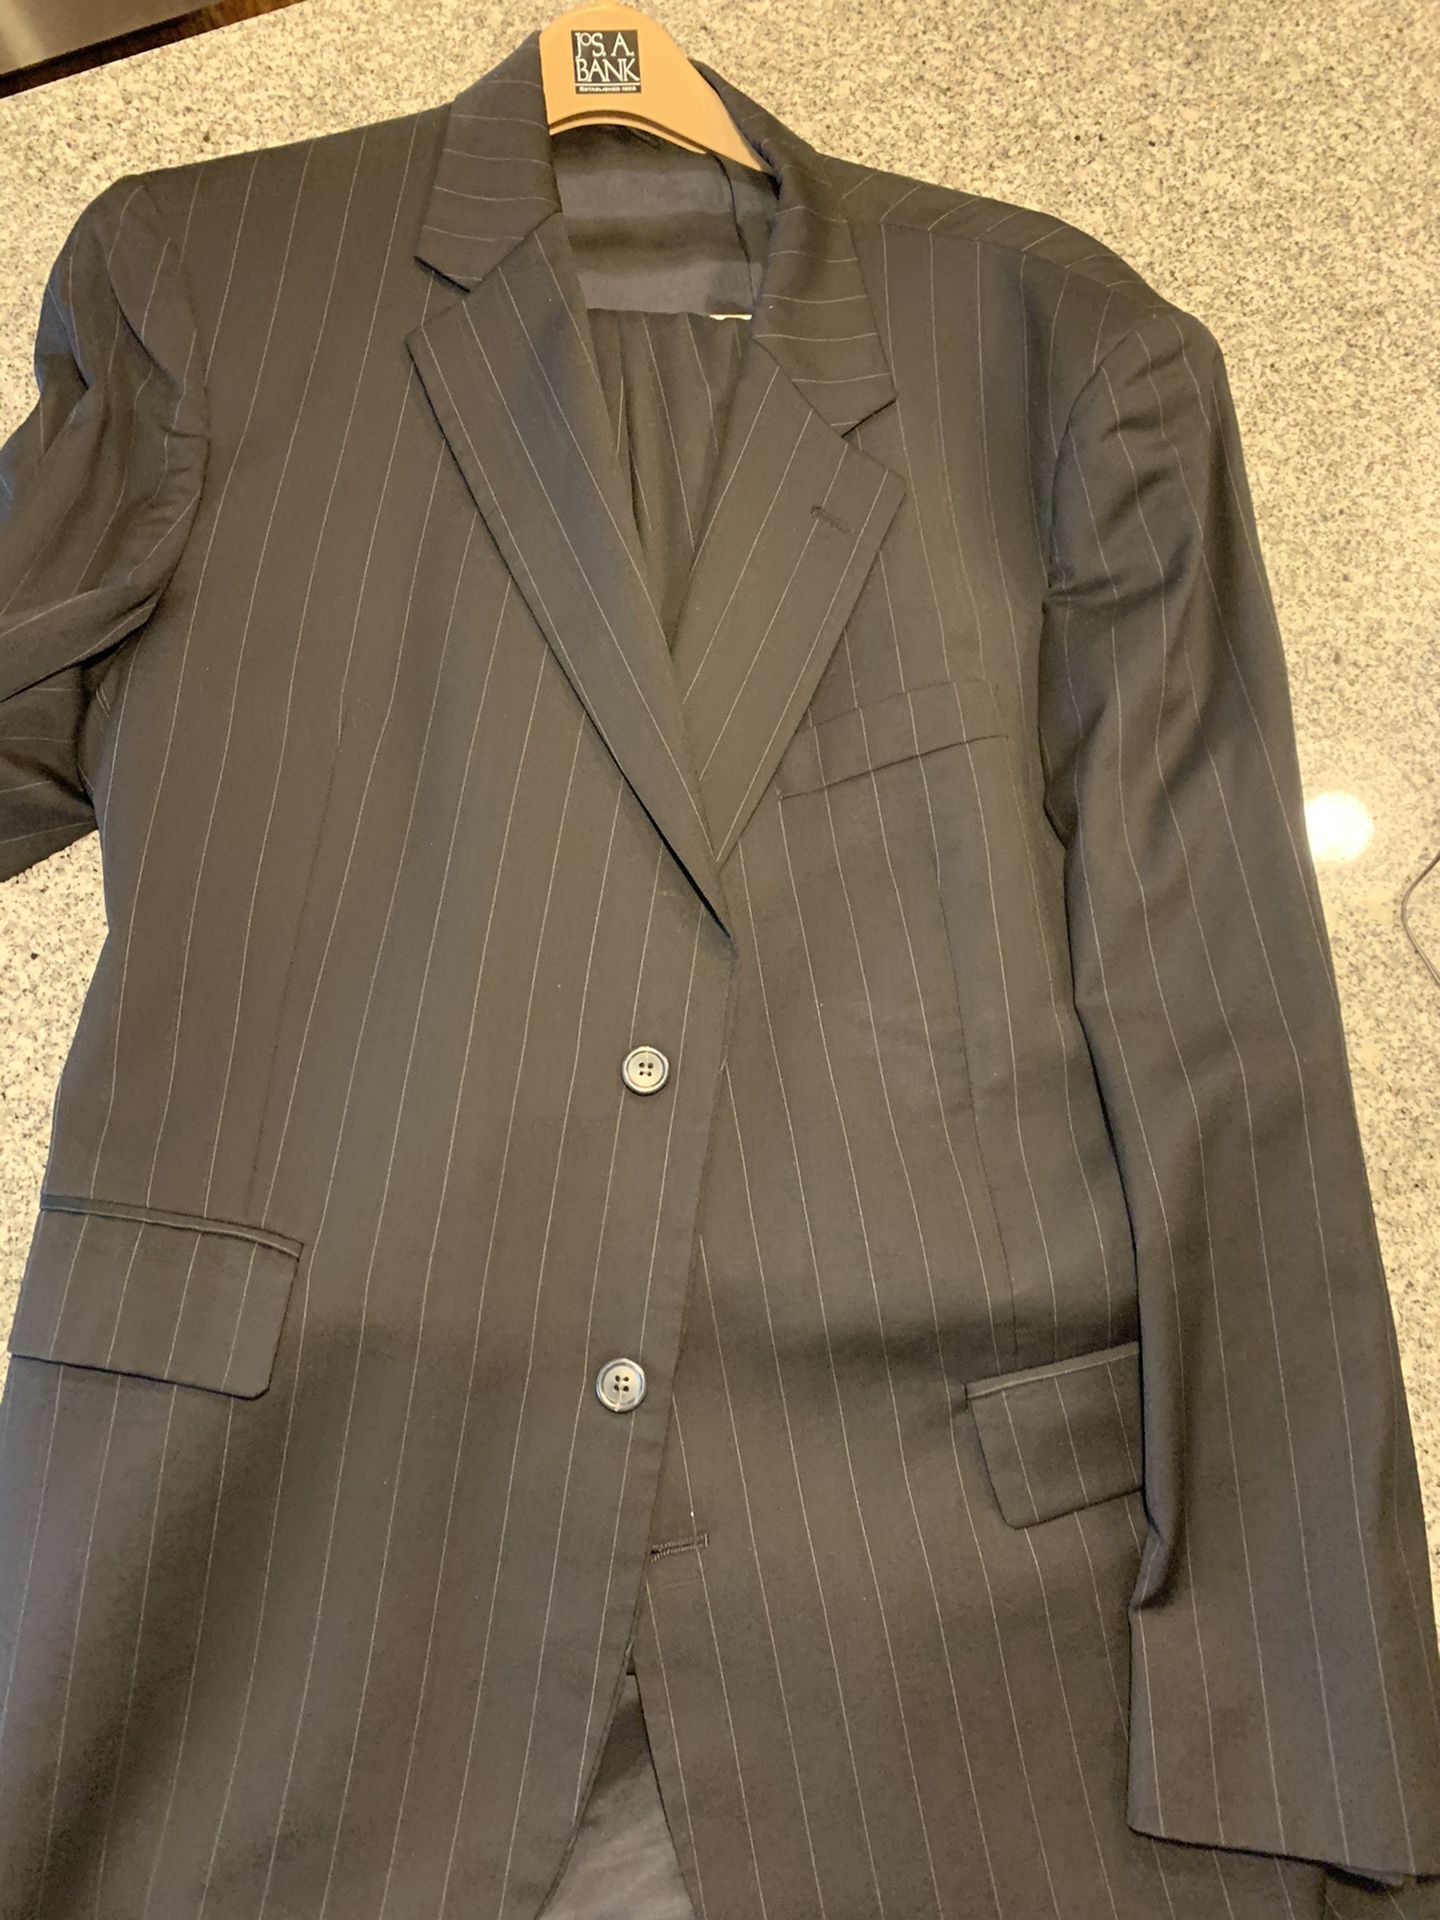 Men’s JOS A BANKS SUITS for Sale in Murrysville, PA - OfferUp